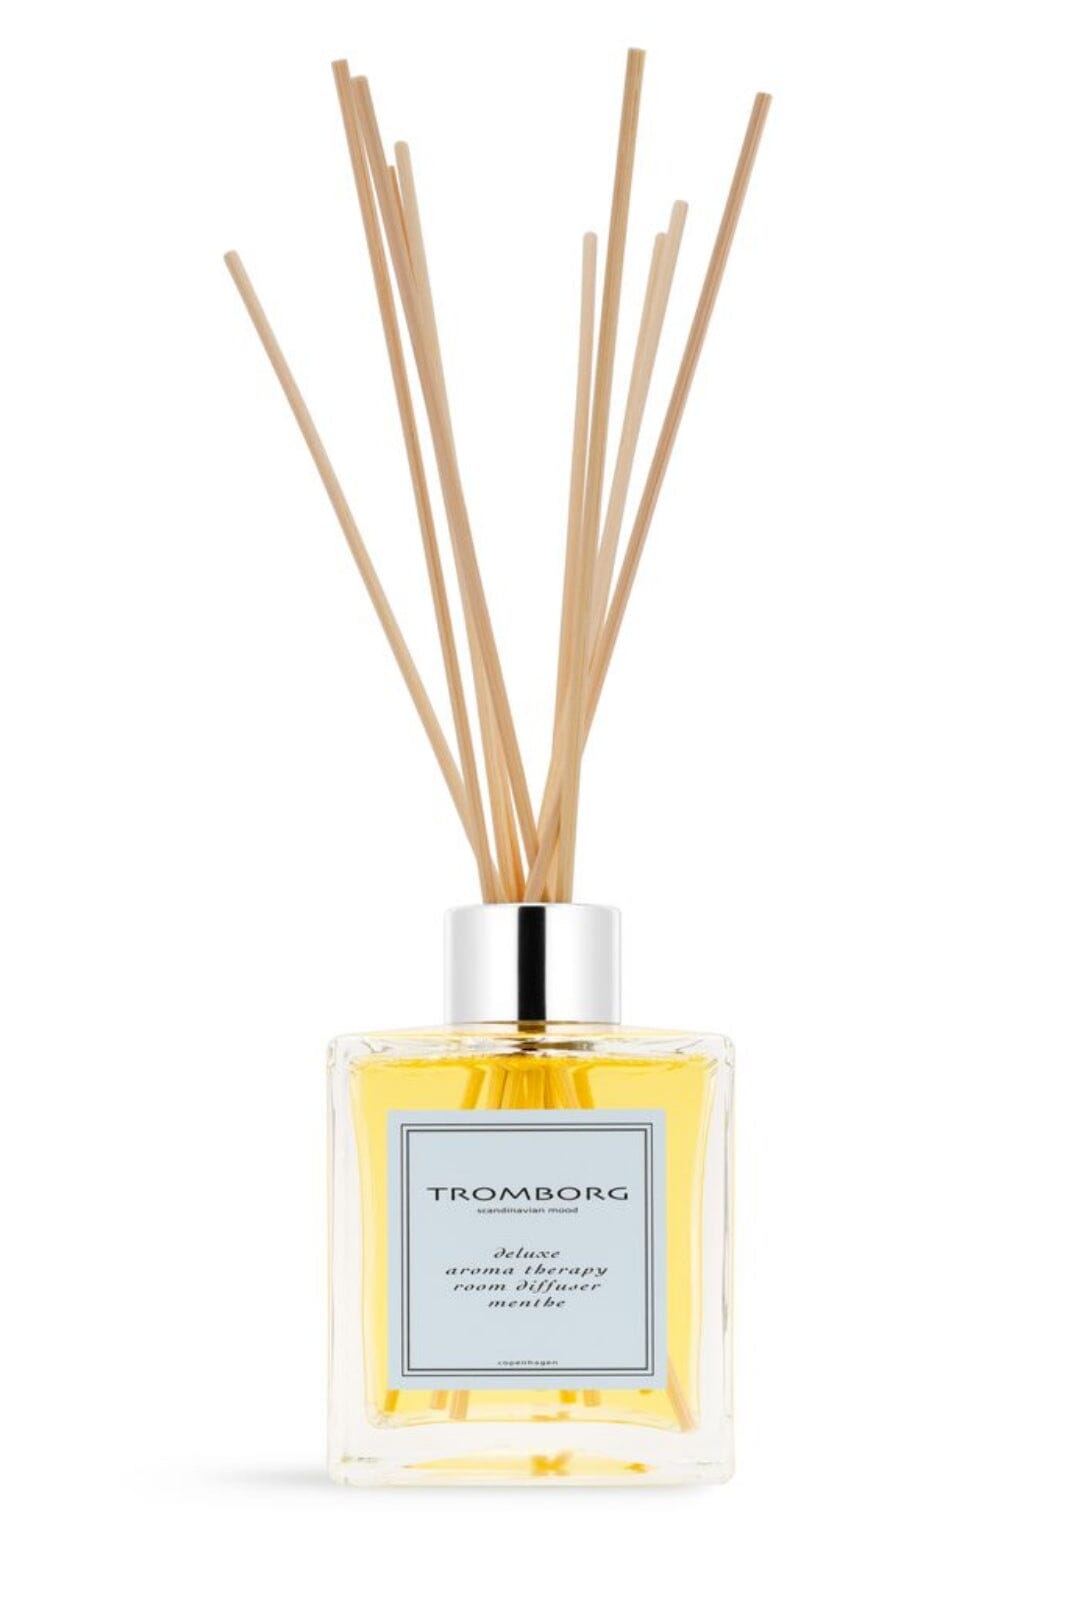 Tromborg - Aroma Therapy Room Diffuser Menthe Duftfrisker 